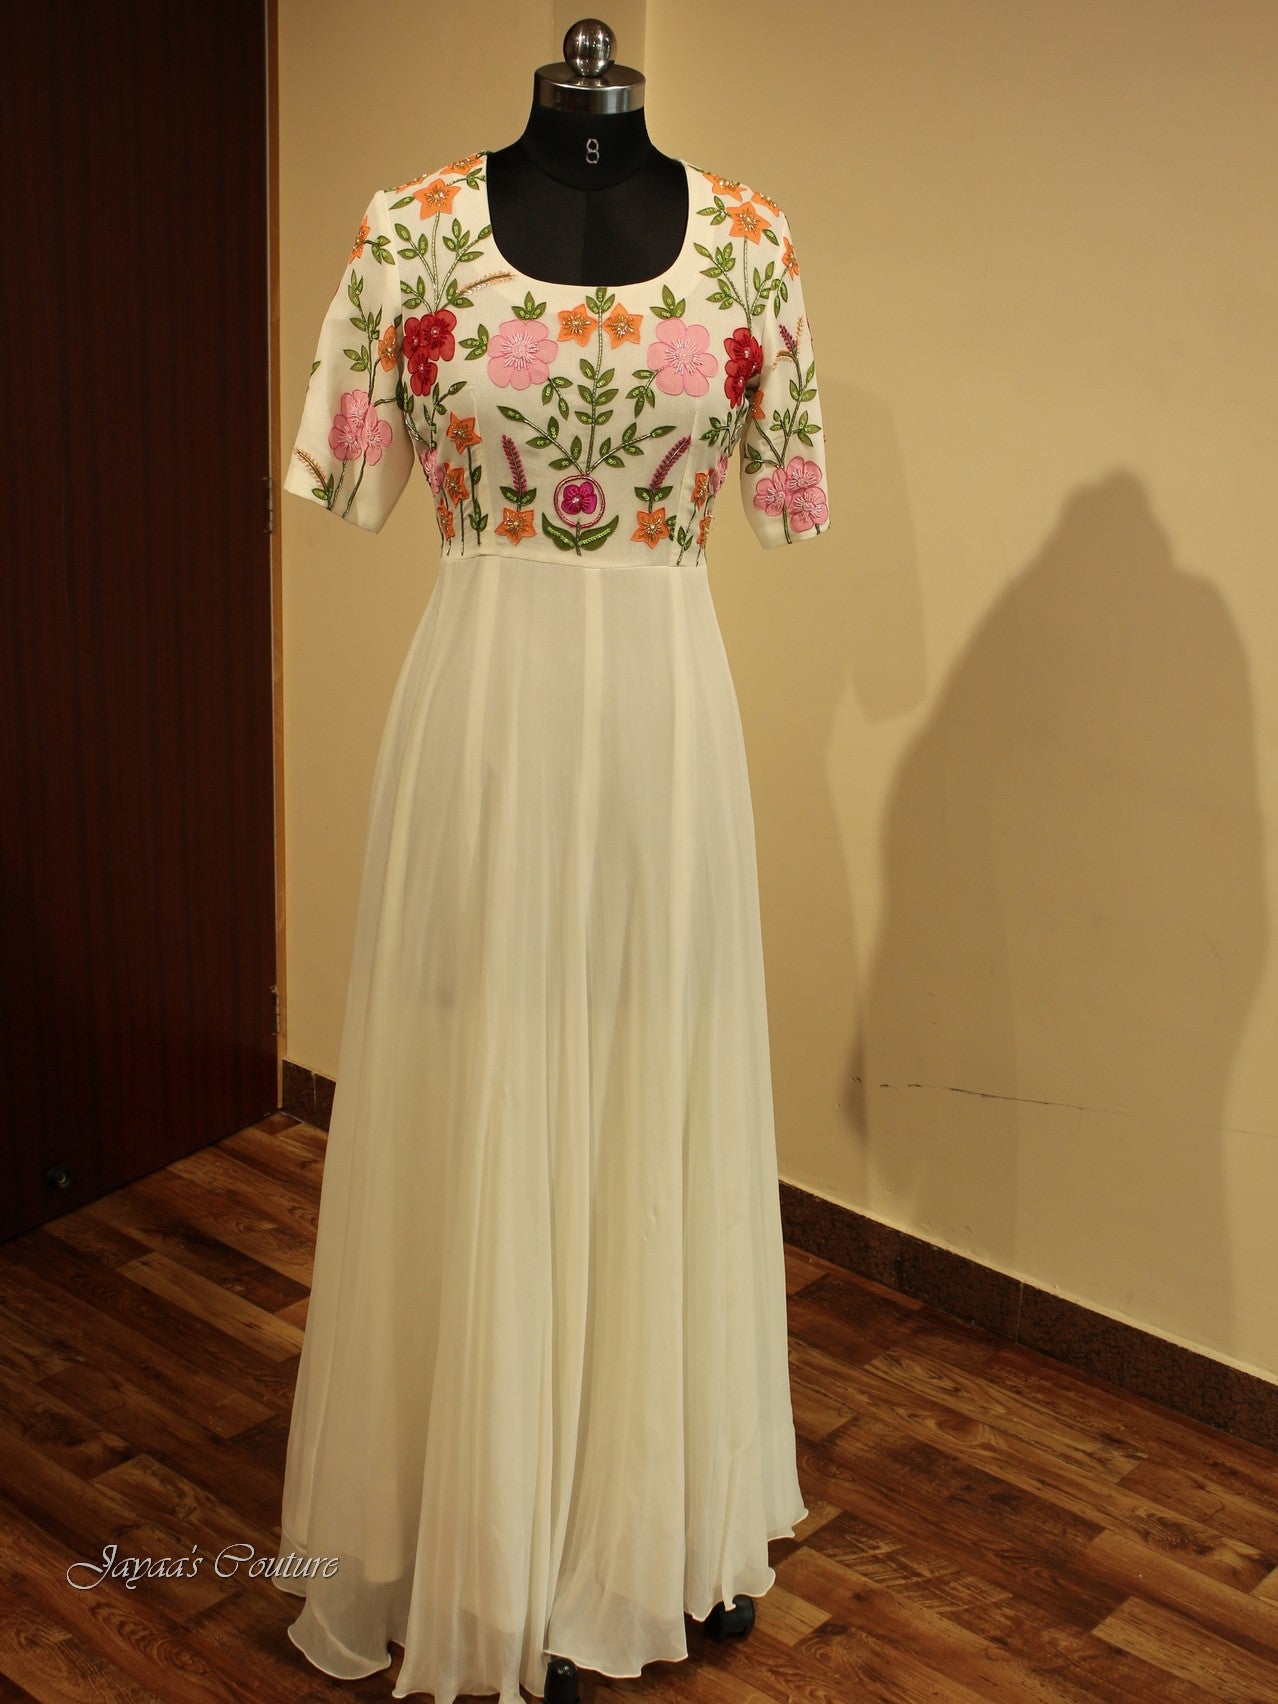 White Handpainted gown